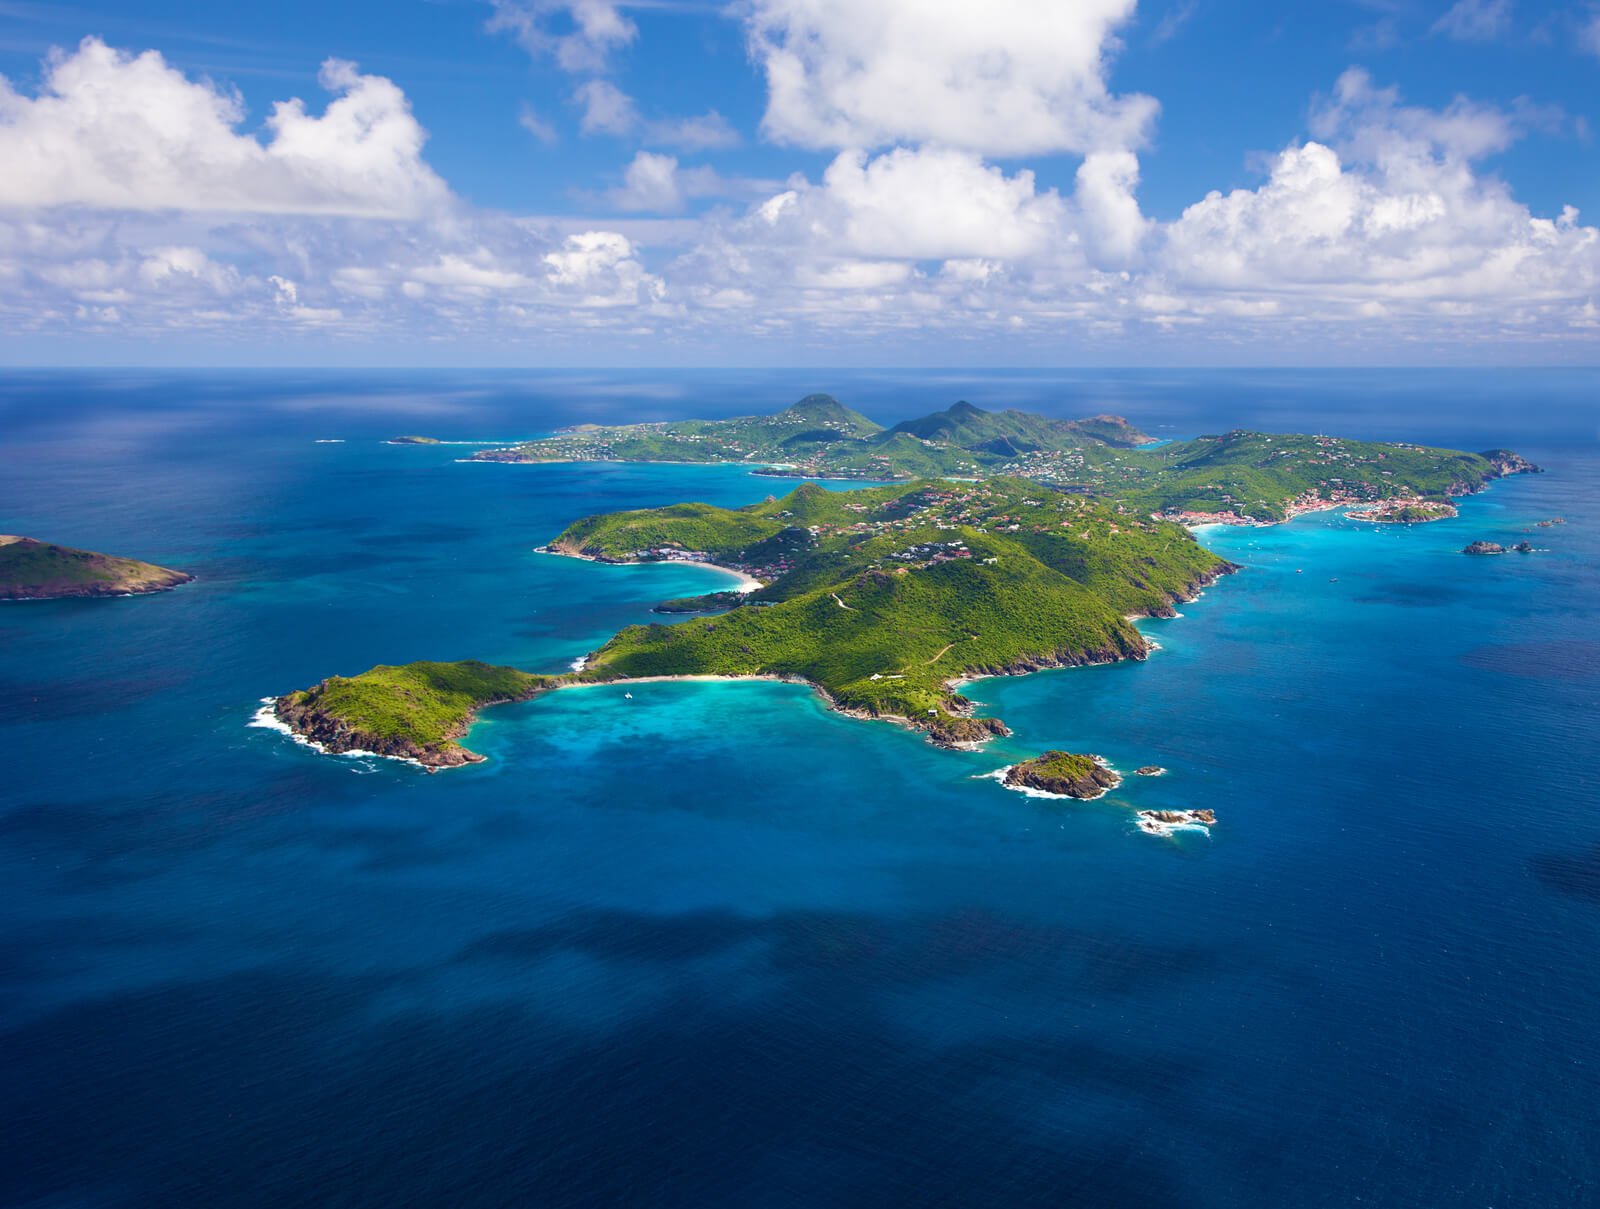 Best Time To Visit St. Barths: Full Travel Guide